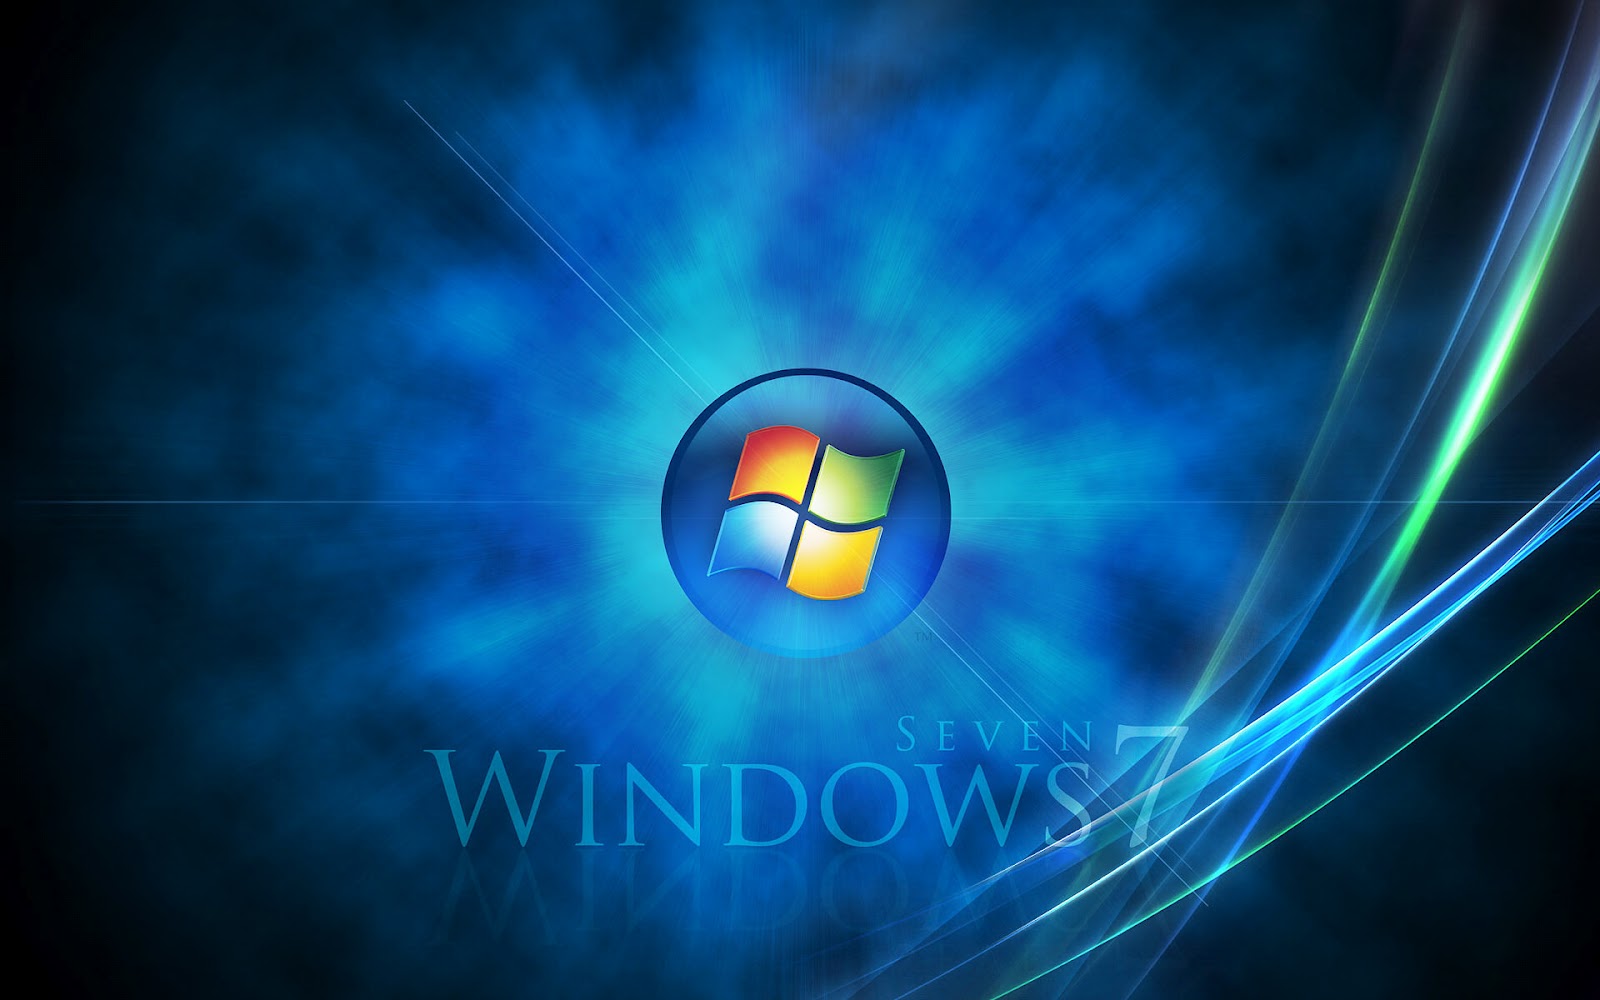 Today I've decided to share some thing that I know About Windows 7 ...